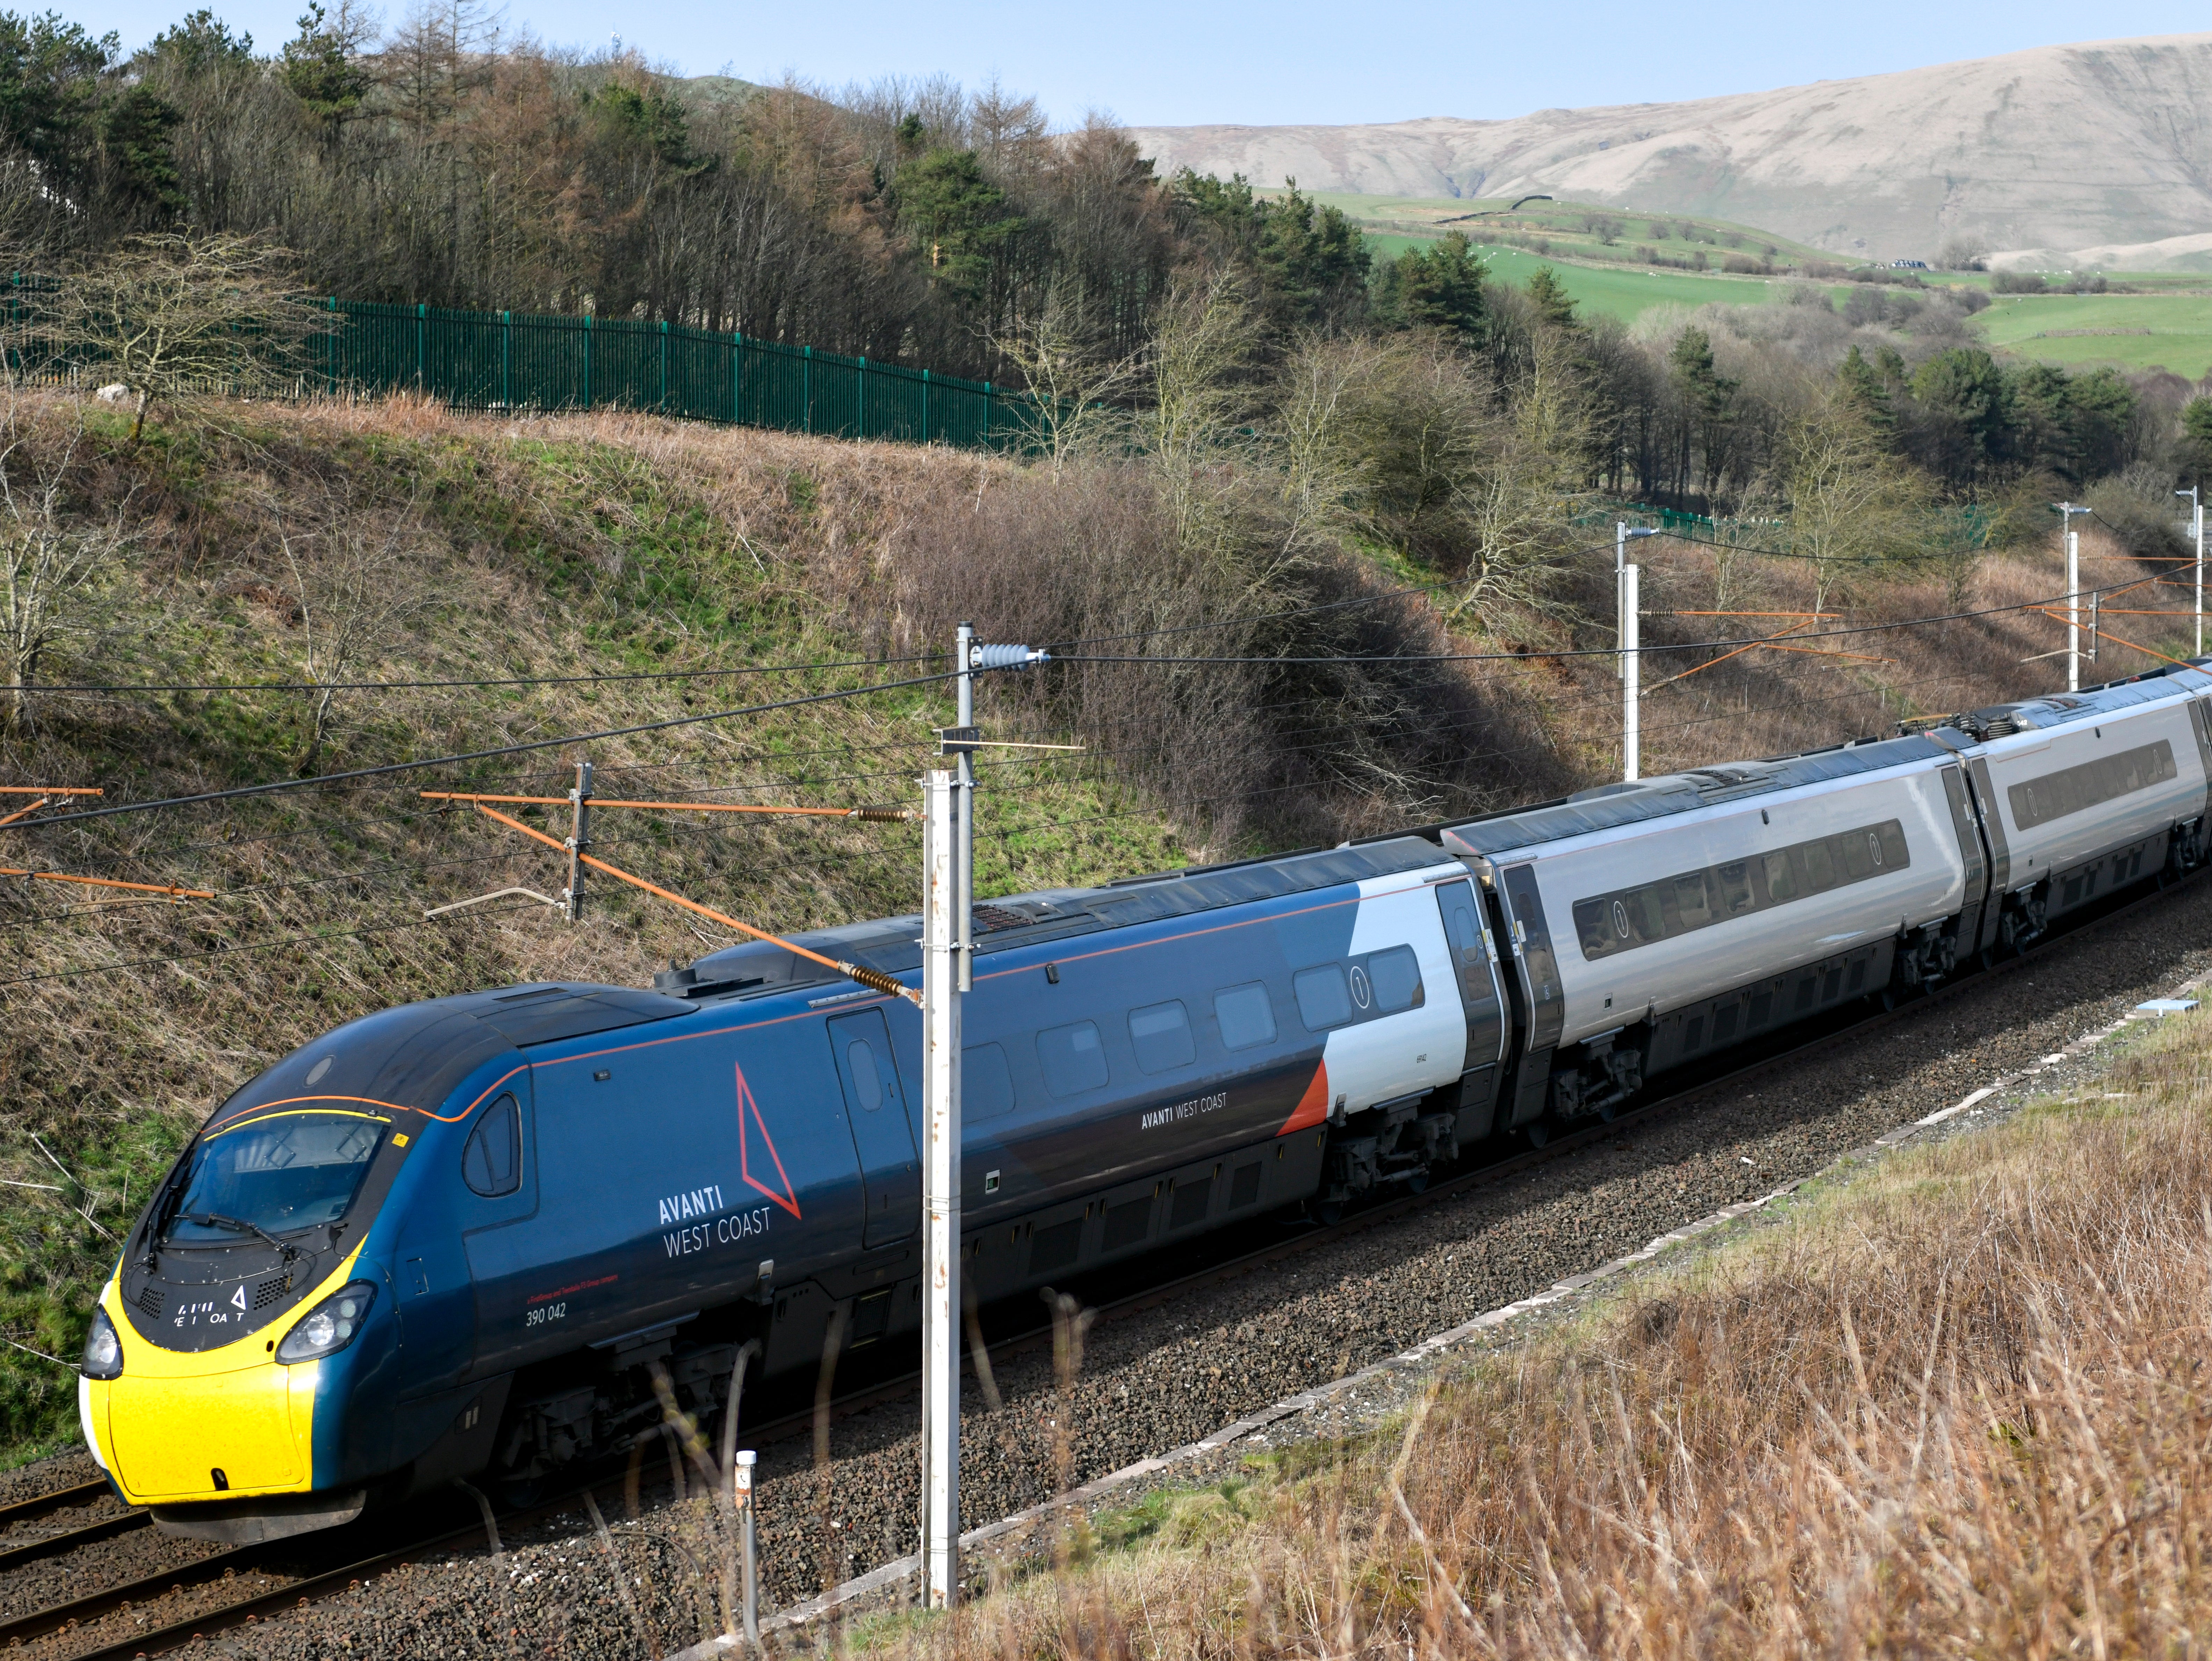 The UK has an extensive rail network but passengers complain of expensive ticket prices